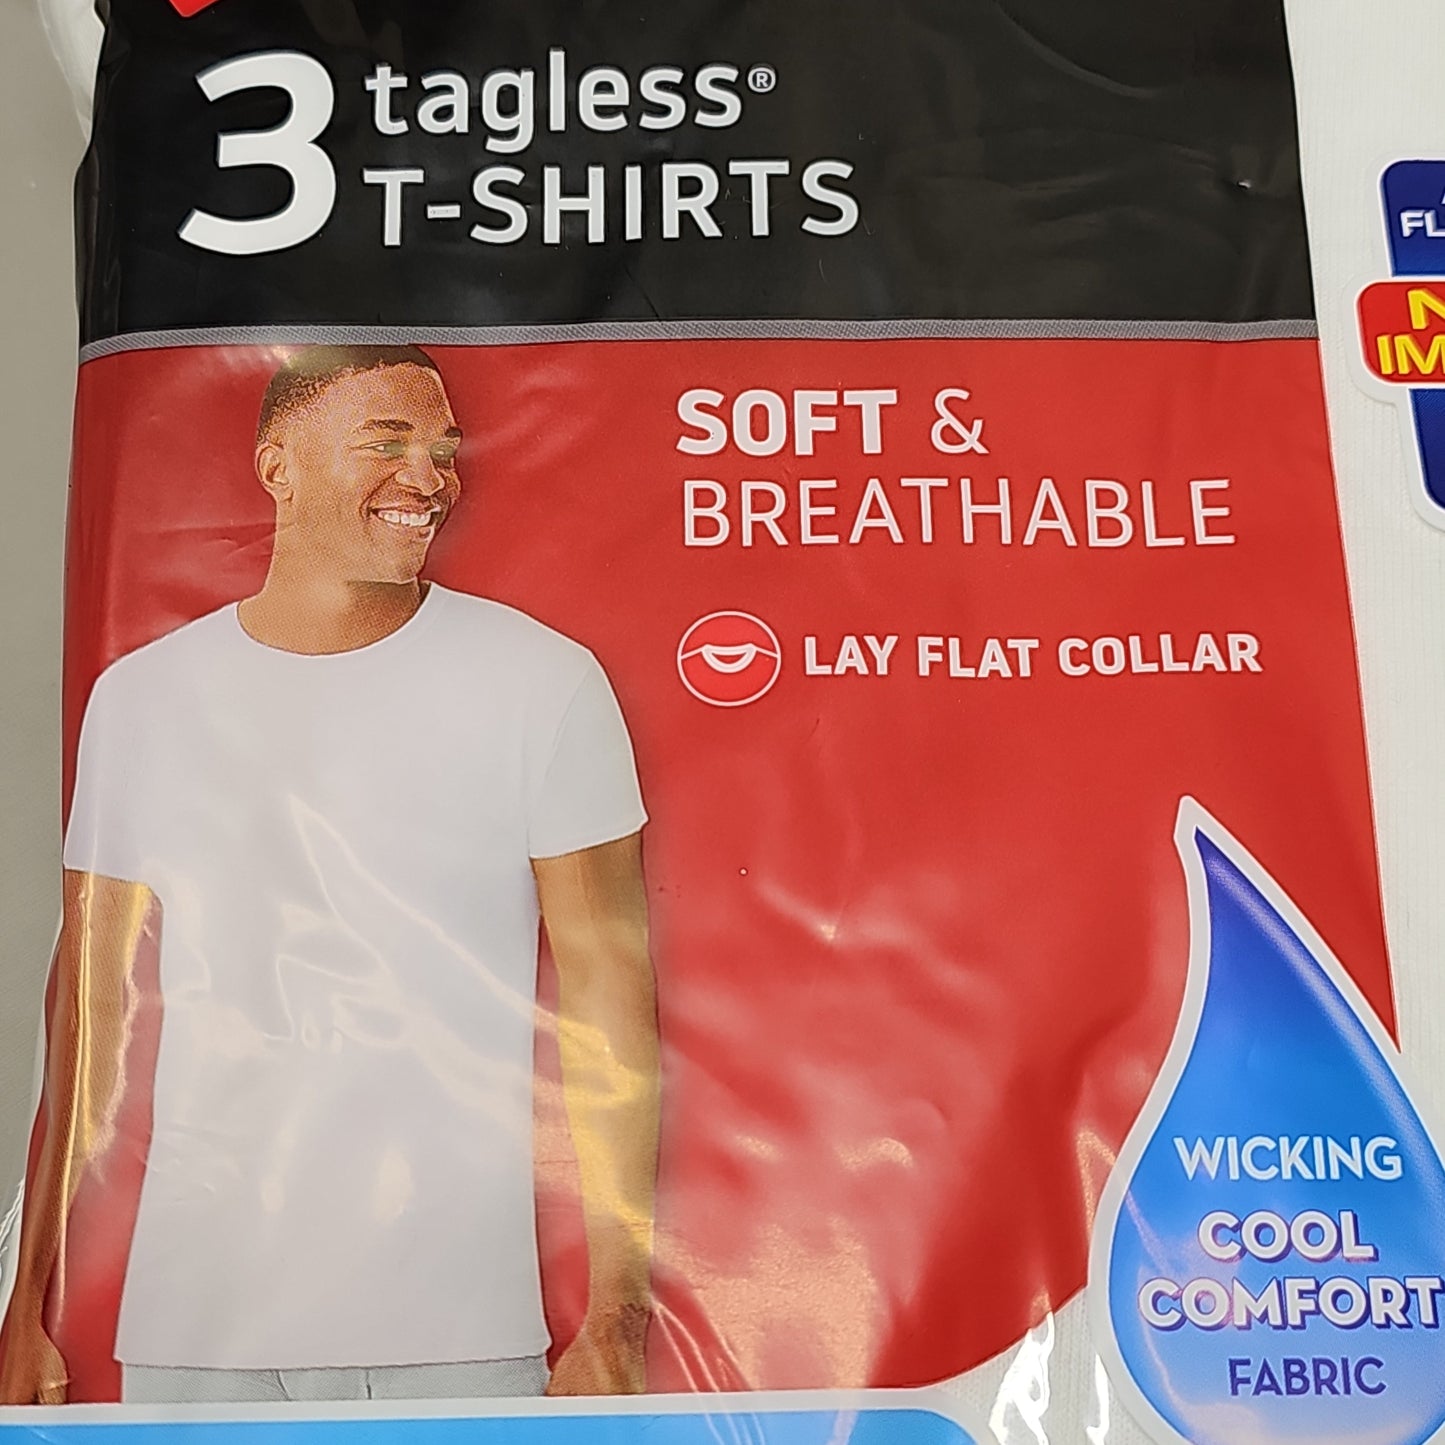 HANES Tagless T-Shirts Pack of 12 Men's Size M 38-40" White #2135 (New)